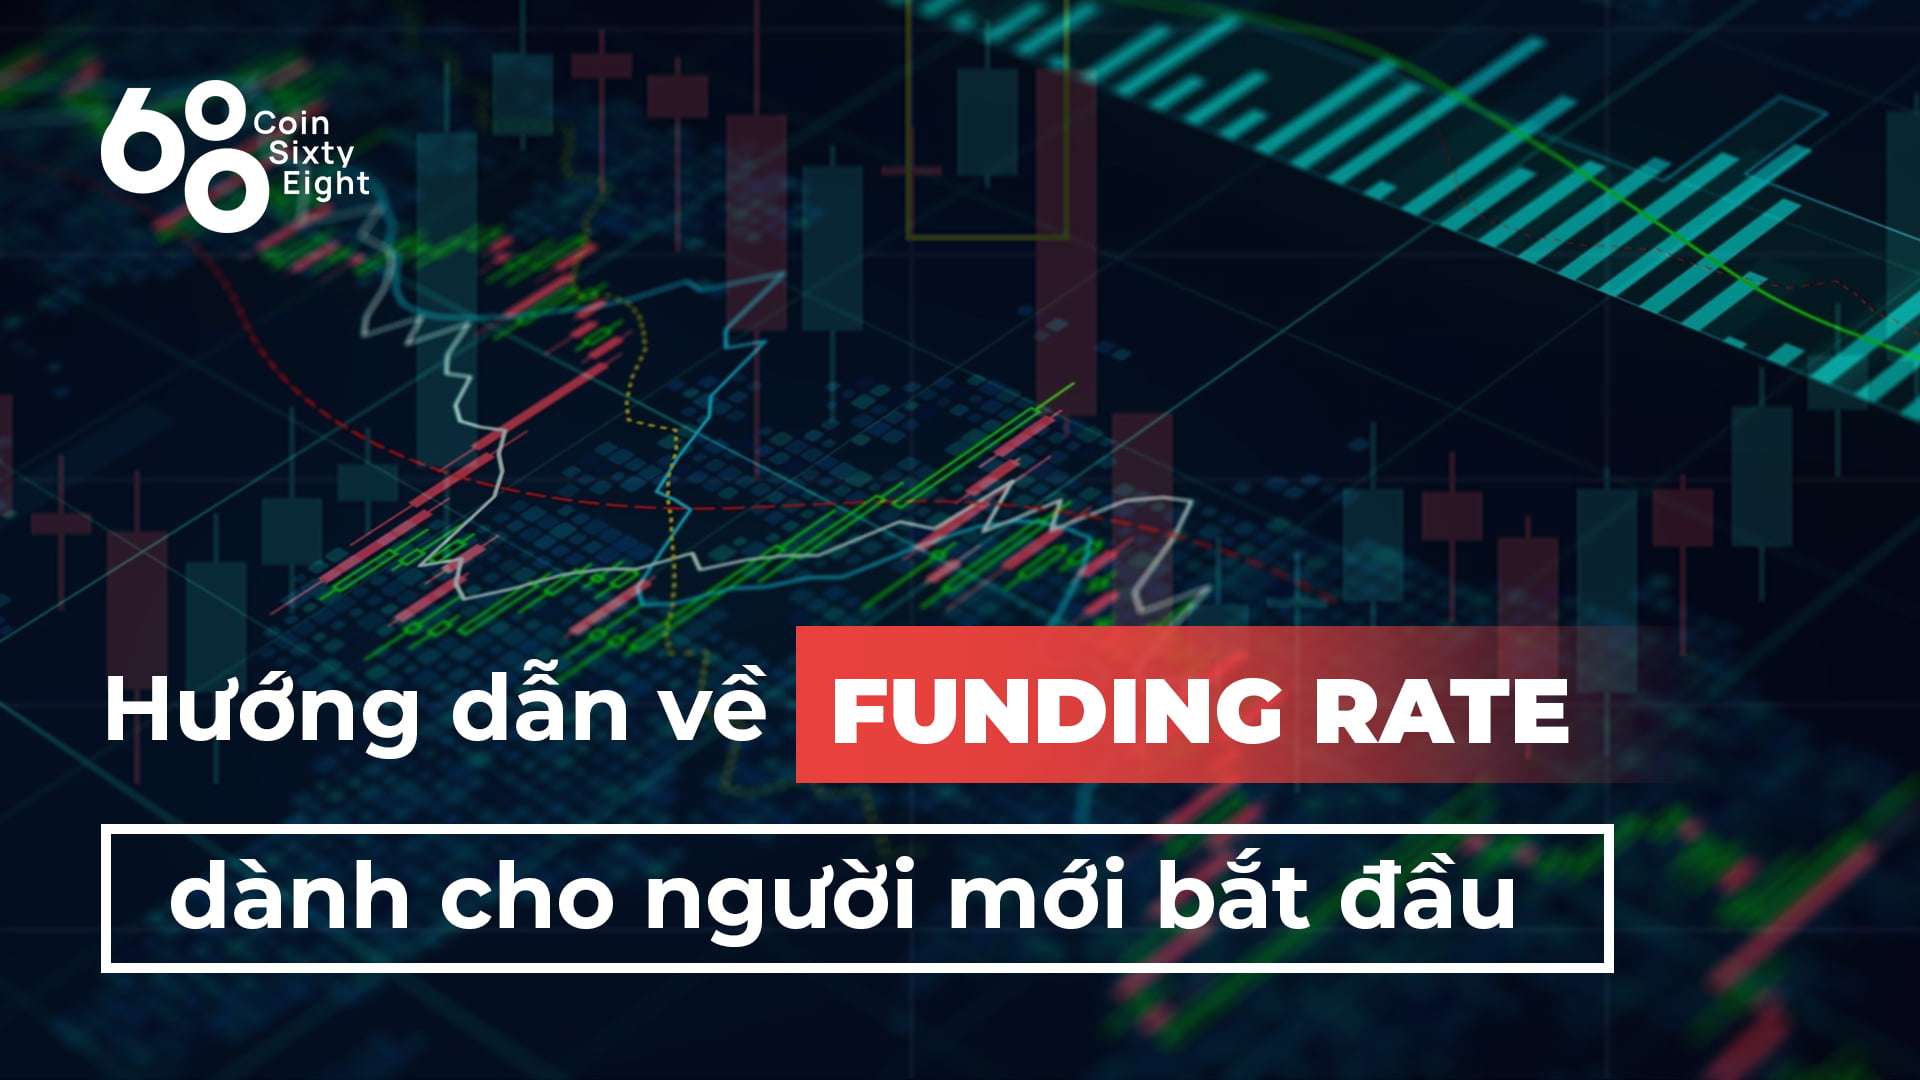 Funding rate